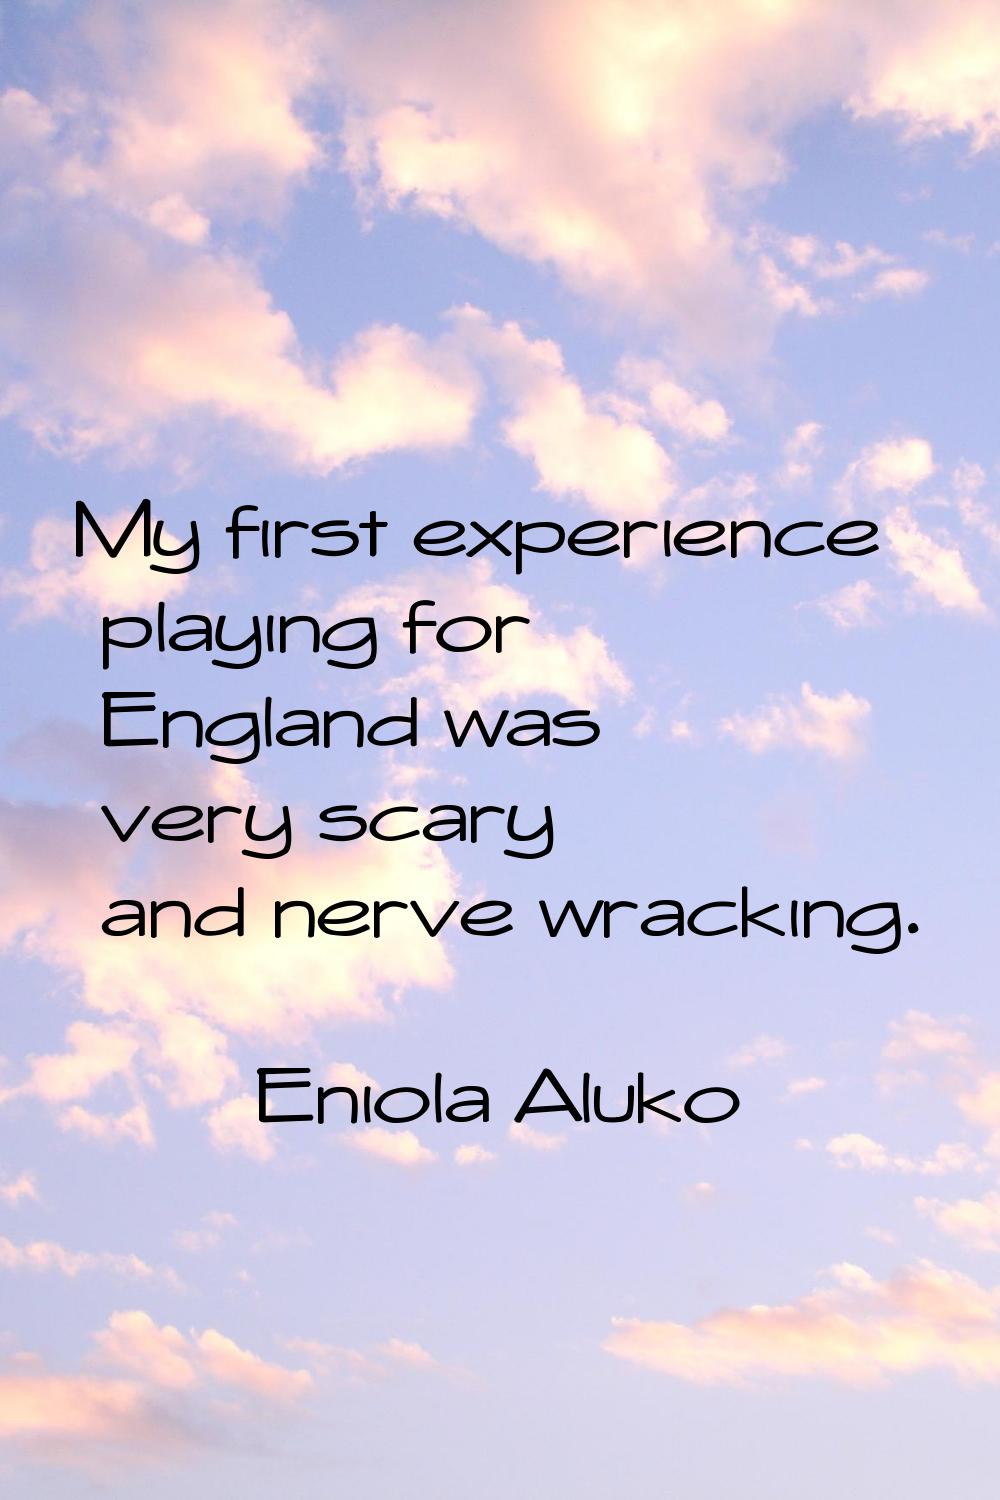 My first experience playing for England was very scary and nerve wracking.